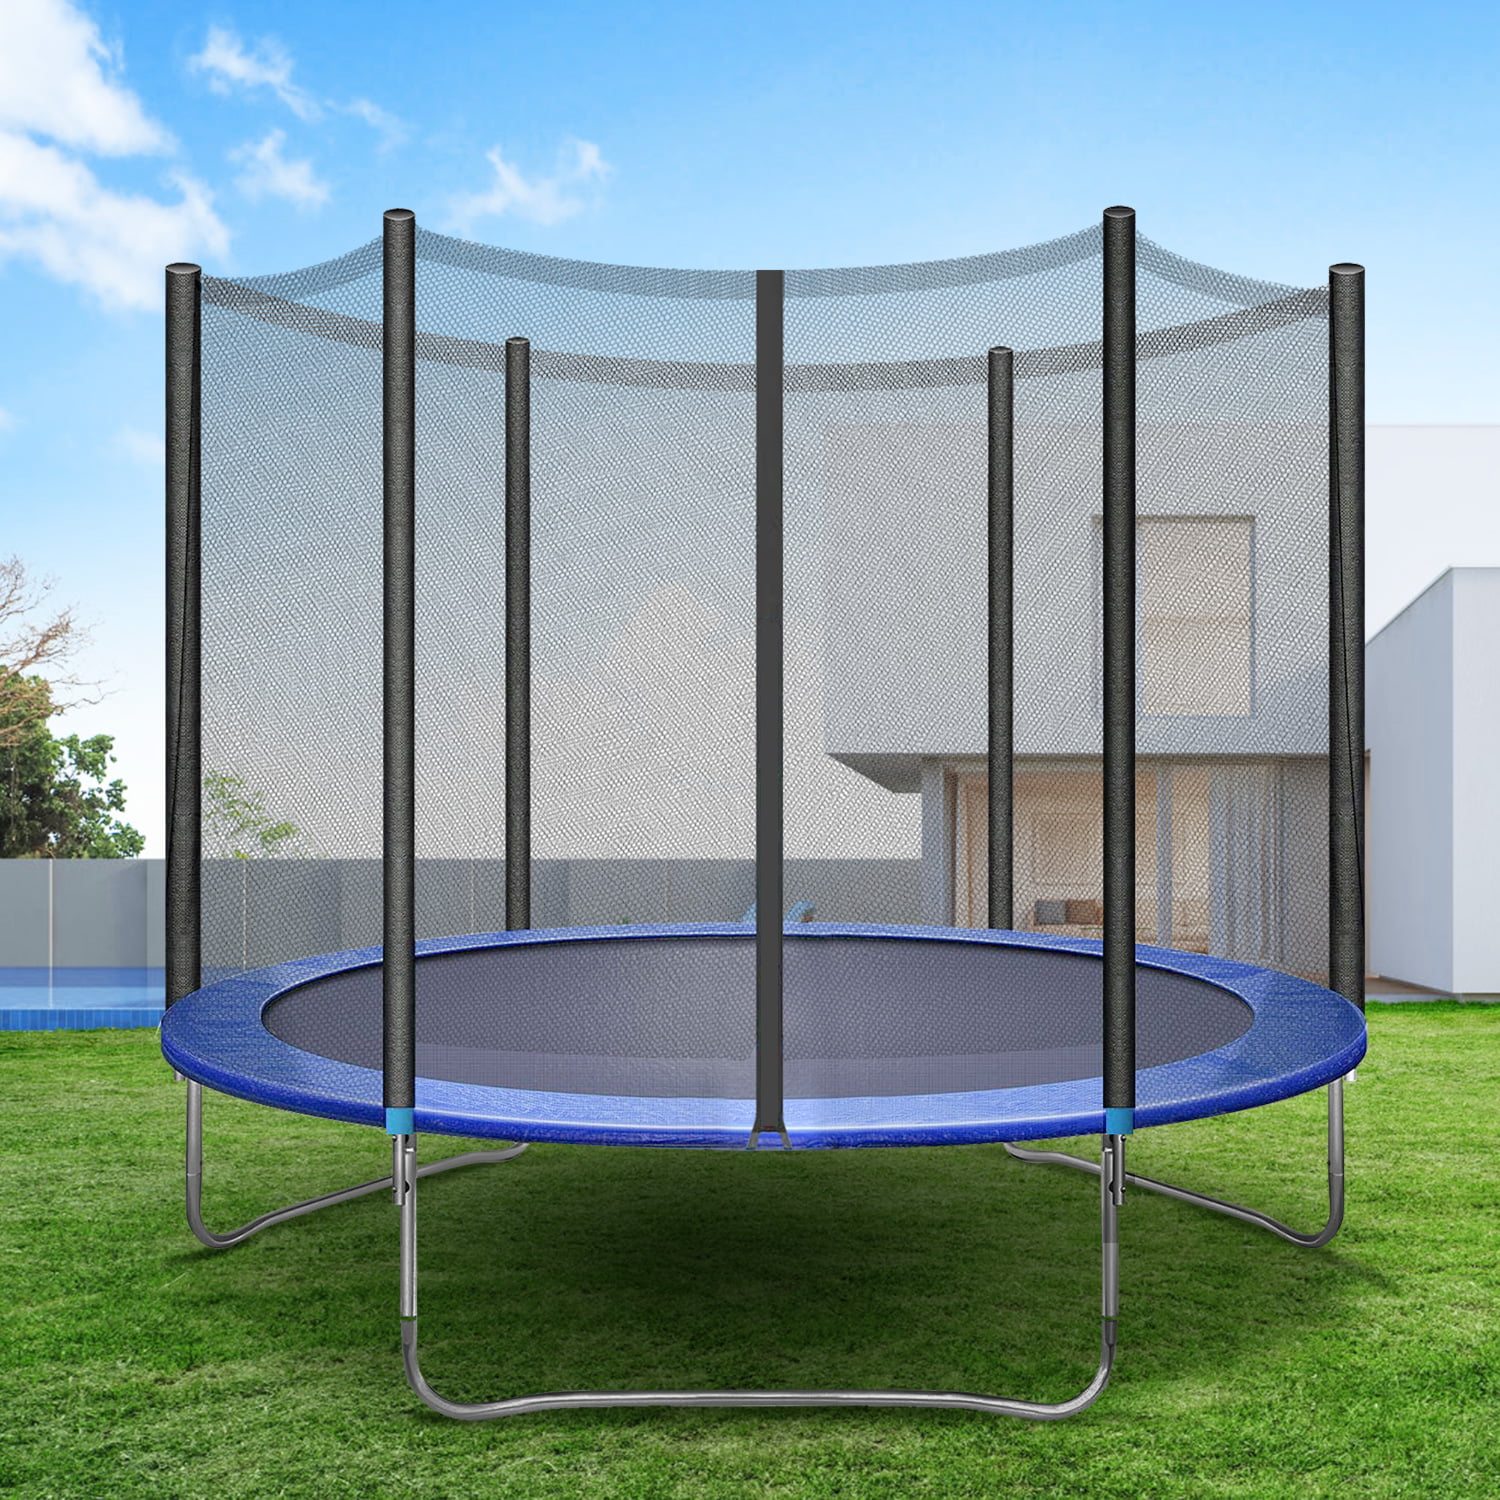 Details about   New 10 FT Trampoline Combo Bounce Jump Safety Enclosure Net W/Spring Pad US 